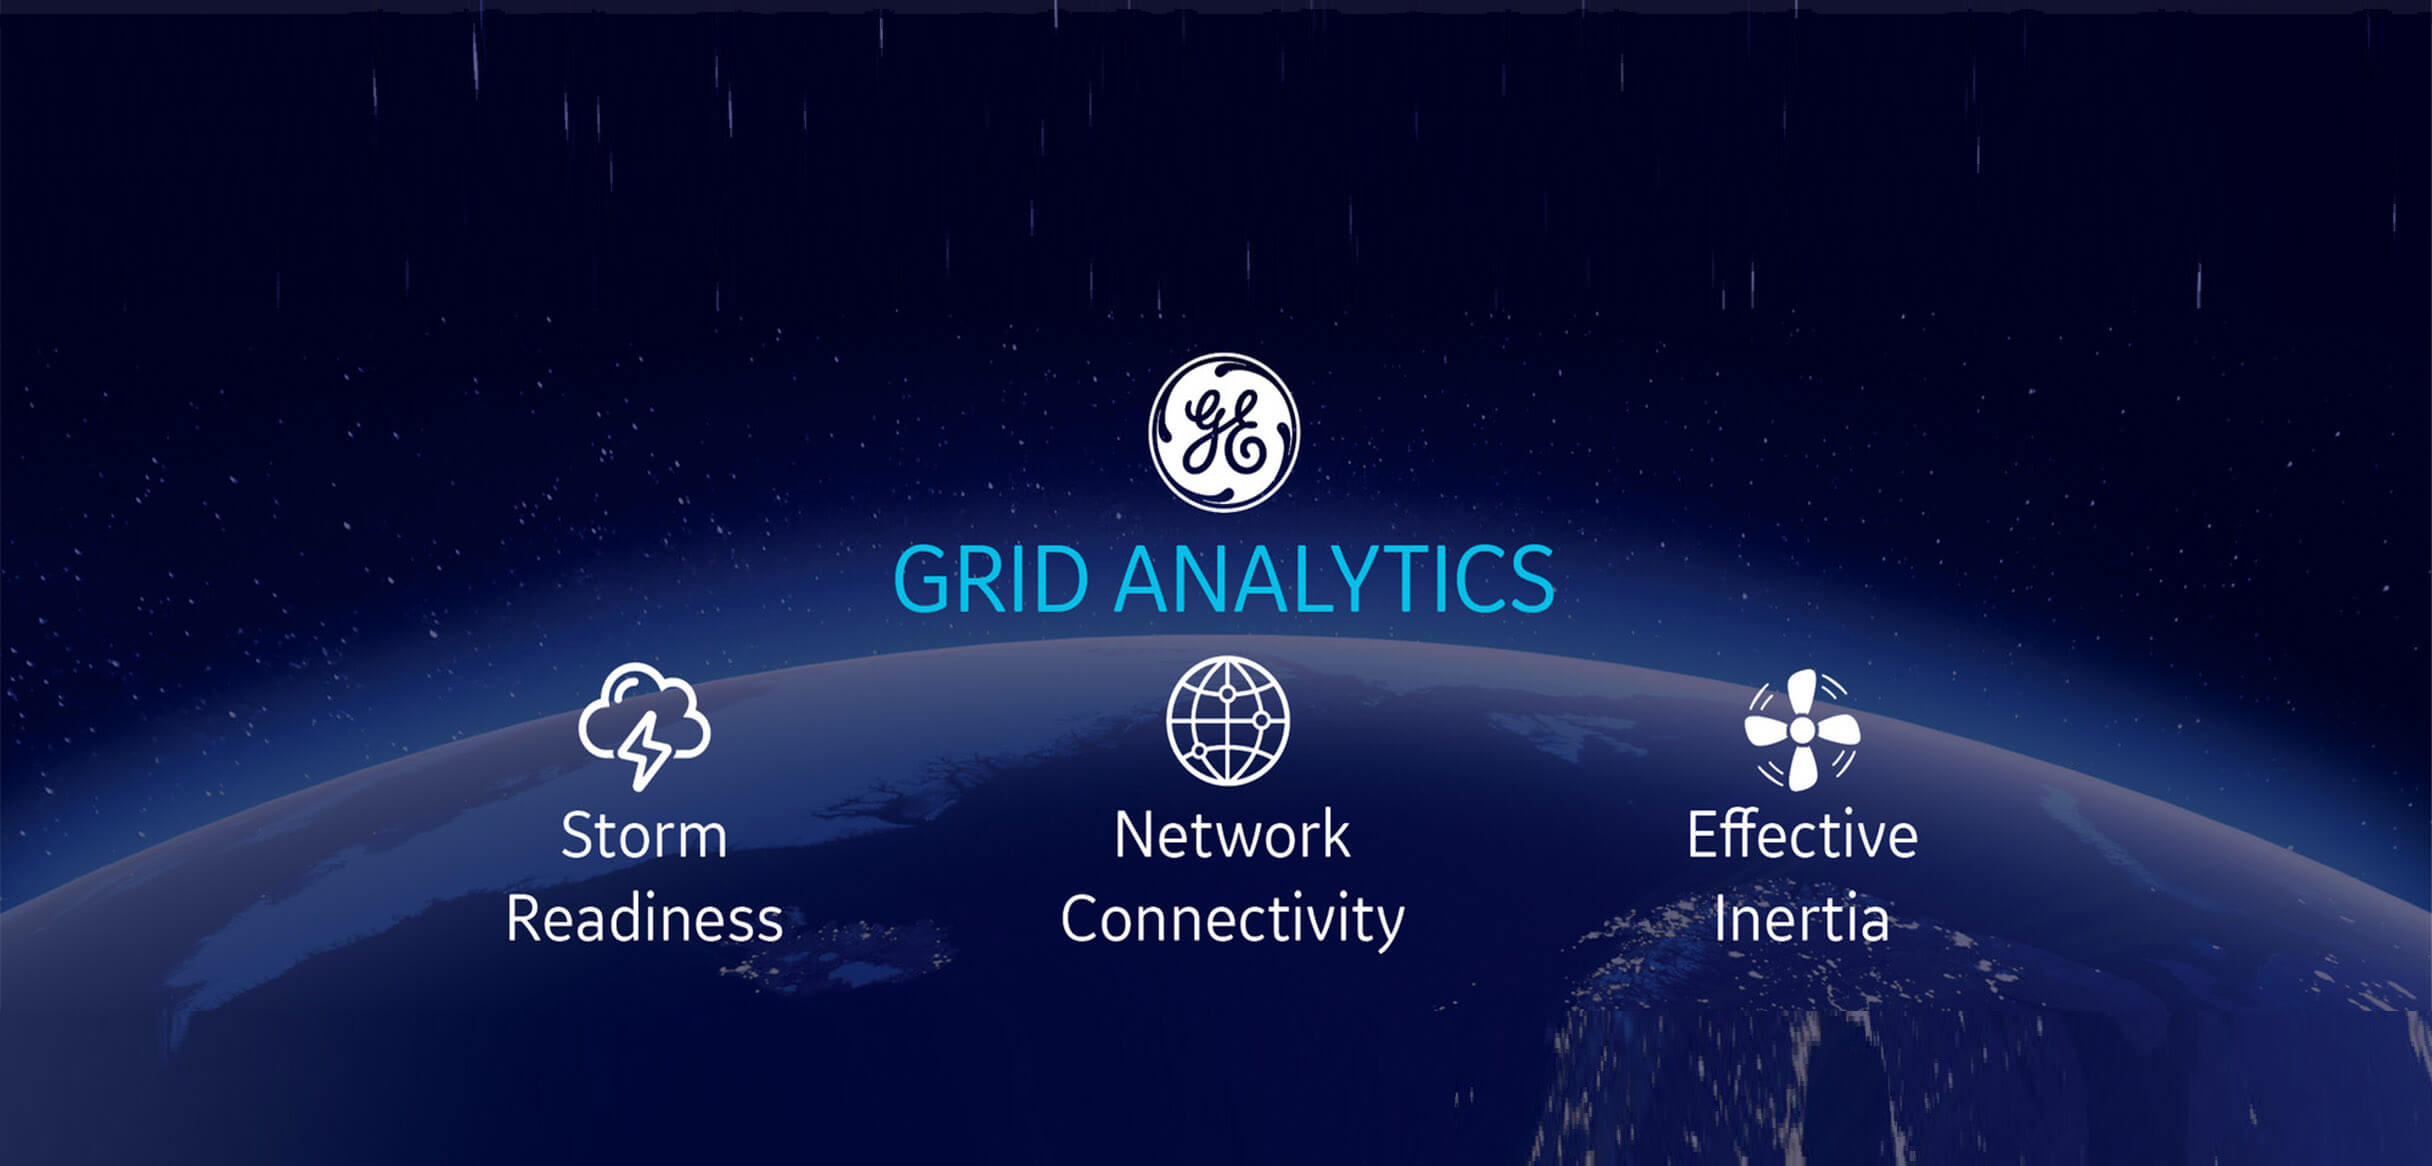 Grid Analytics to help with storm readiness and network connectivity | GE Digital EnergyGrid Analytics to help with storm readiness and network connectivity | GE Digital Energy